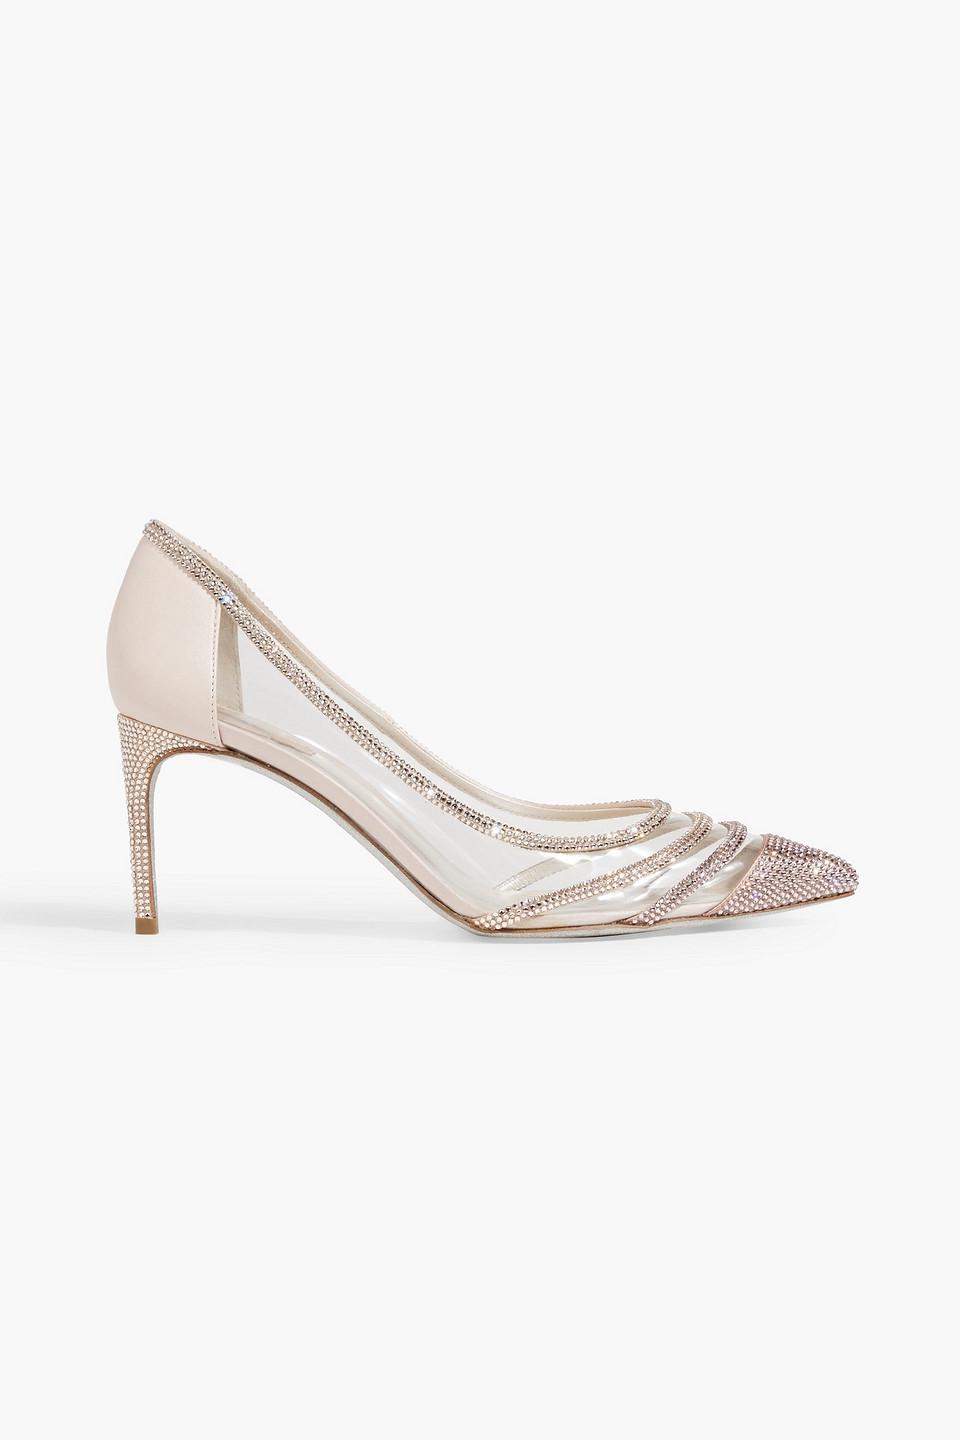 Rene Caovilla Vivienne Embellished Satin And Pvc Pumps in White | Lyst